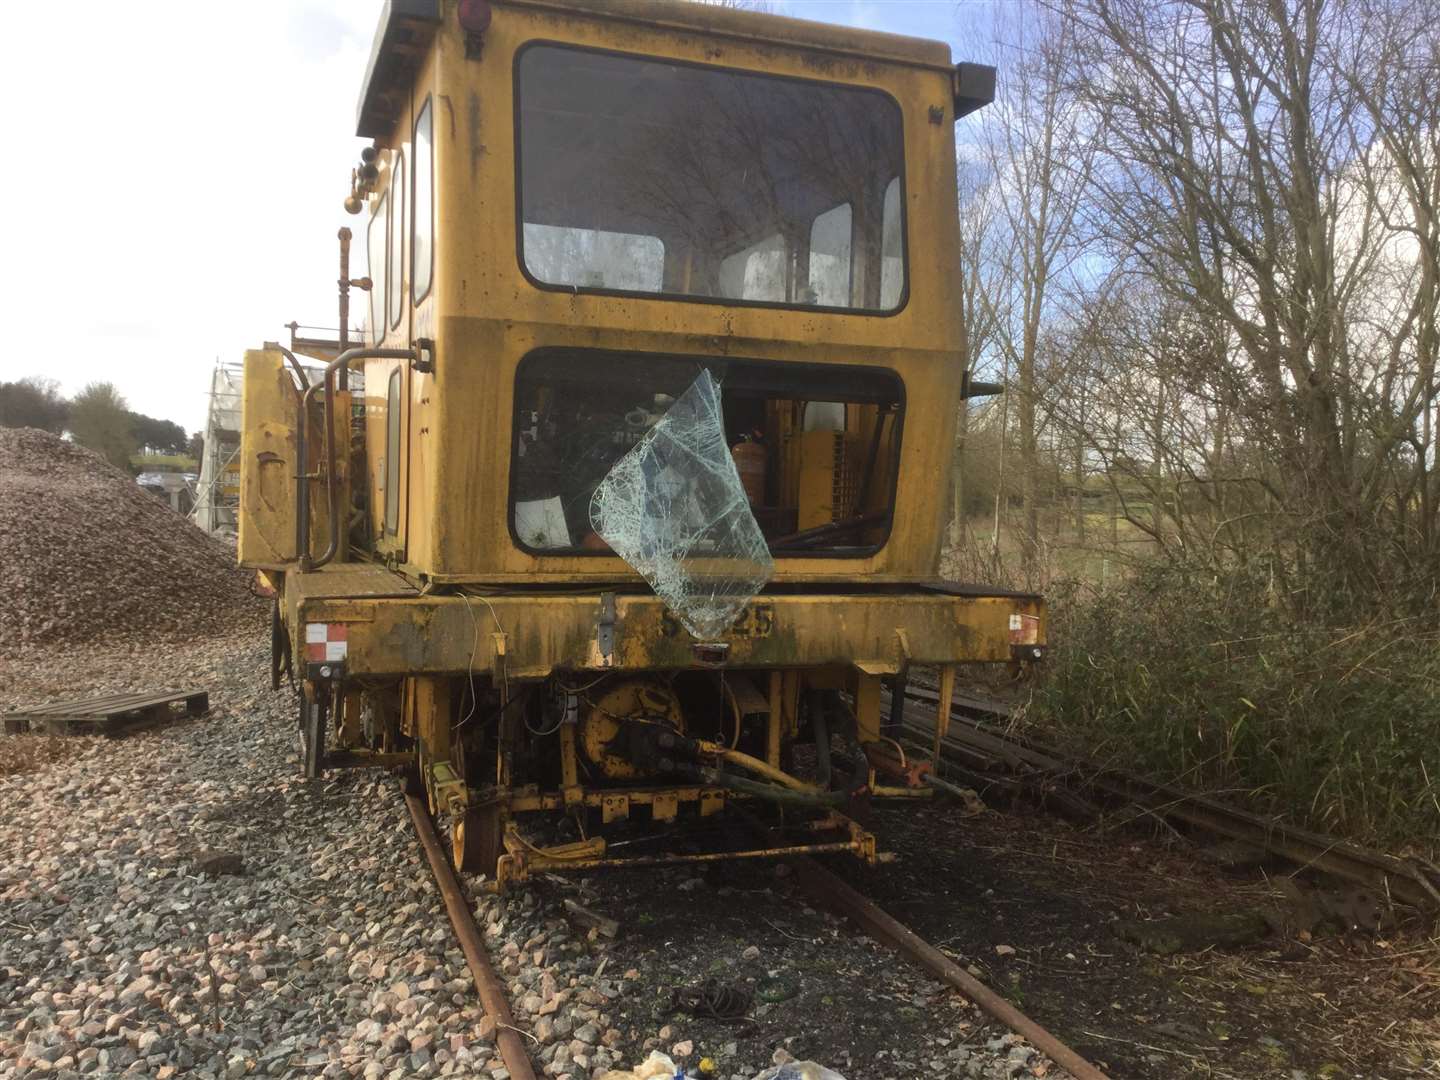 Damage to the tamping machine where glass covered by plastic was smashed to gain entry to the cab above